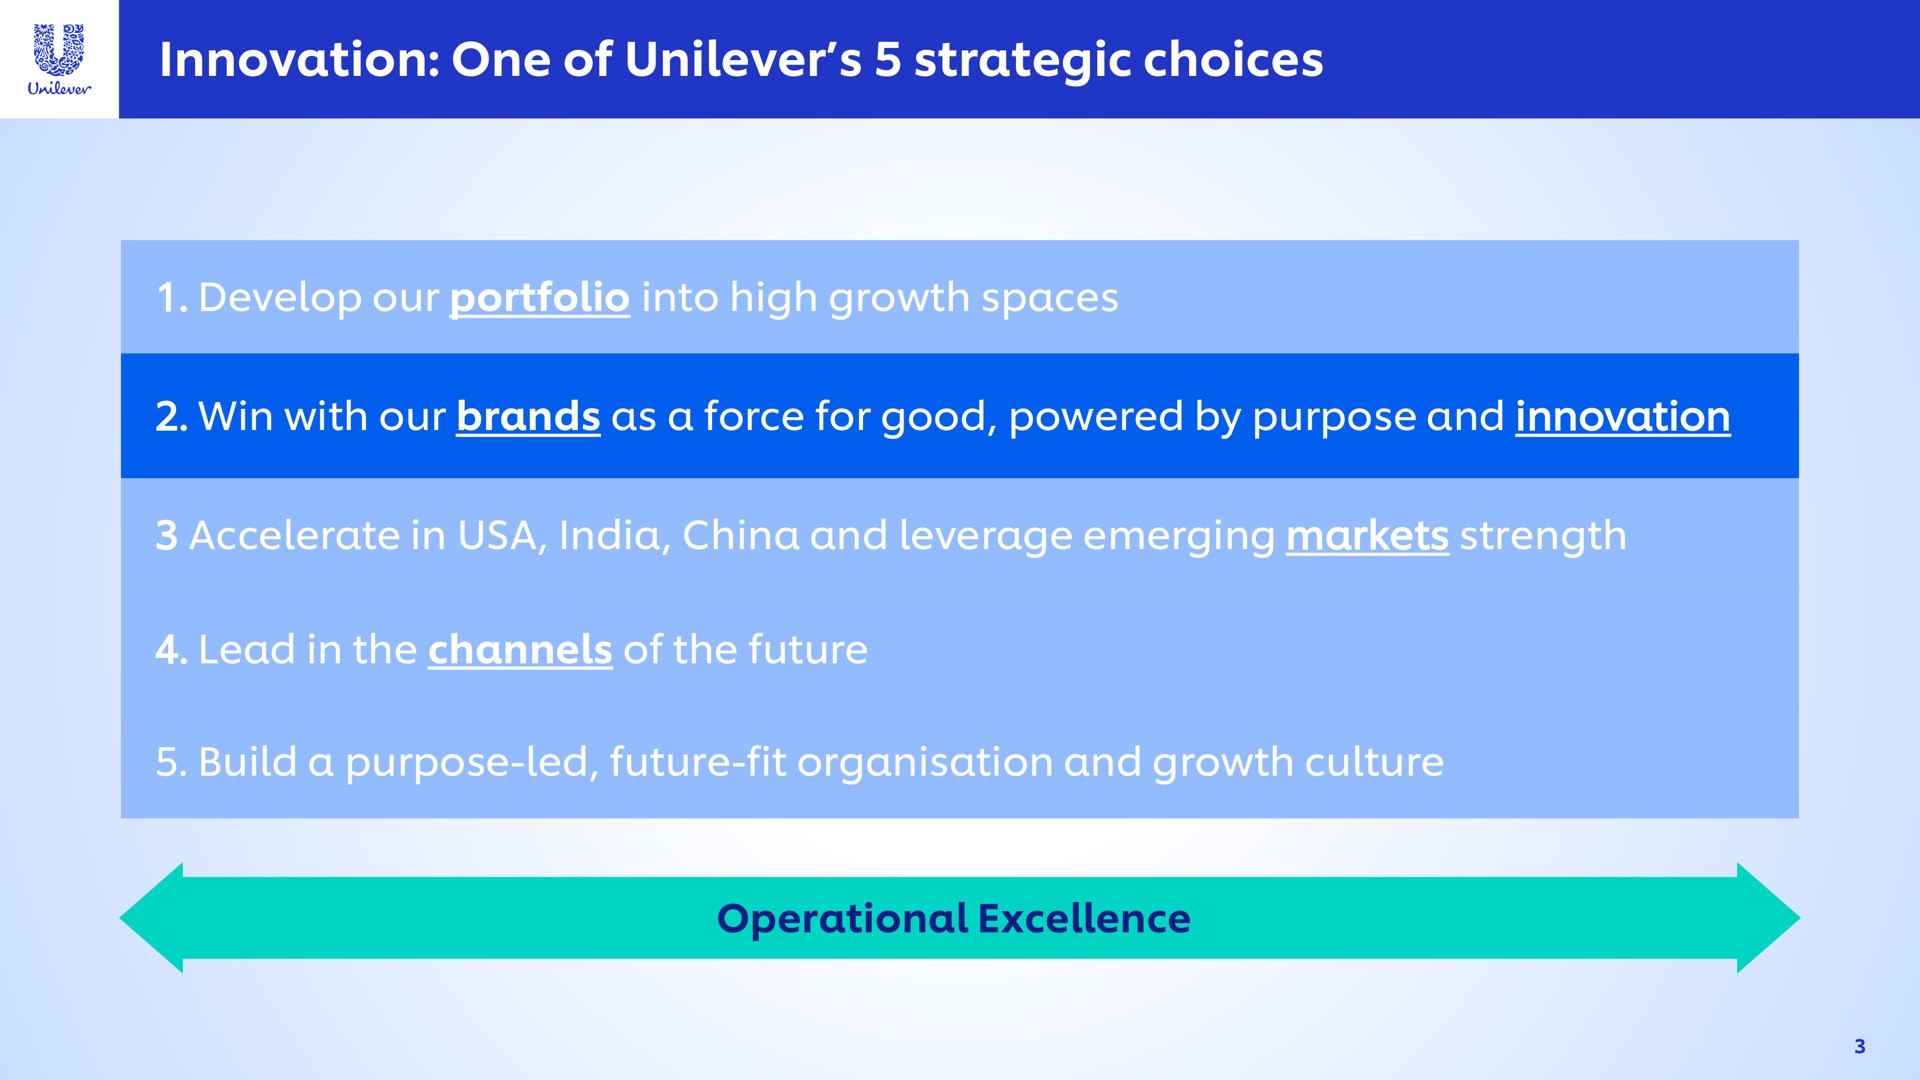 innovation one of strategic choices win with our brands as a force for good powered by purpose and operational excellence | Unilever